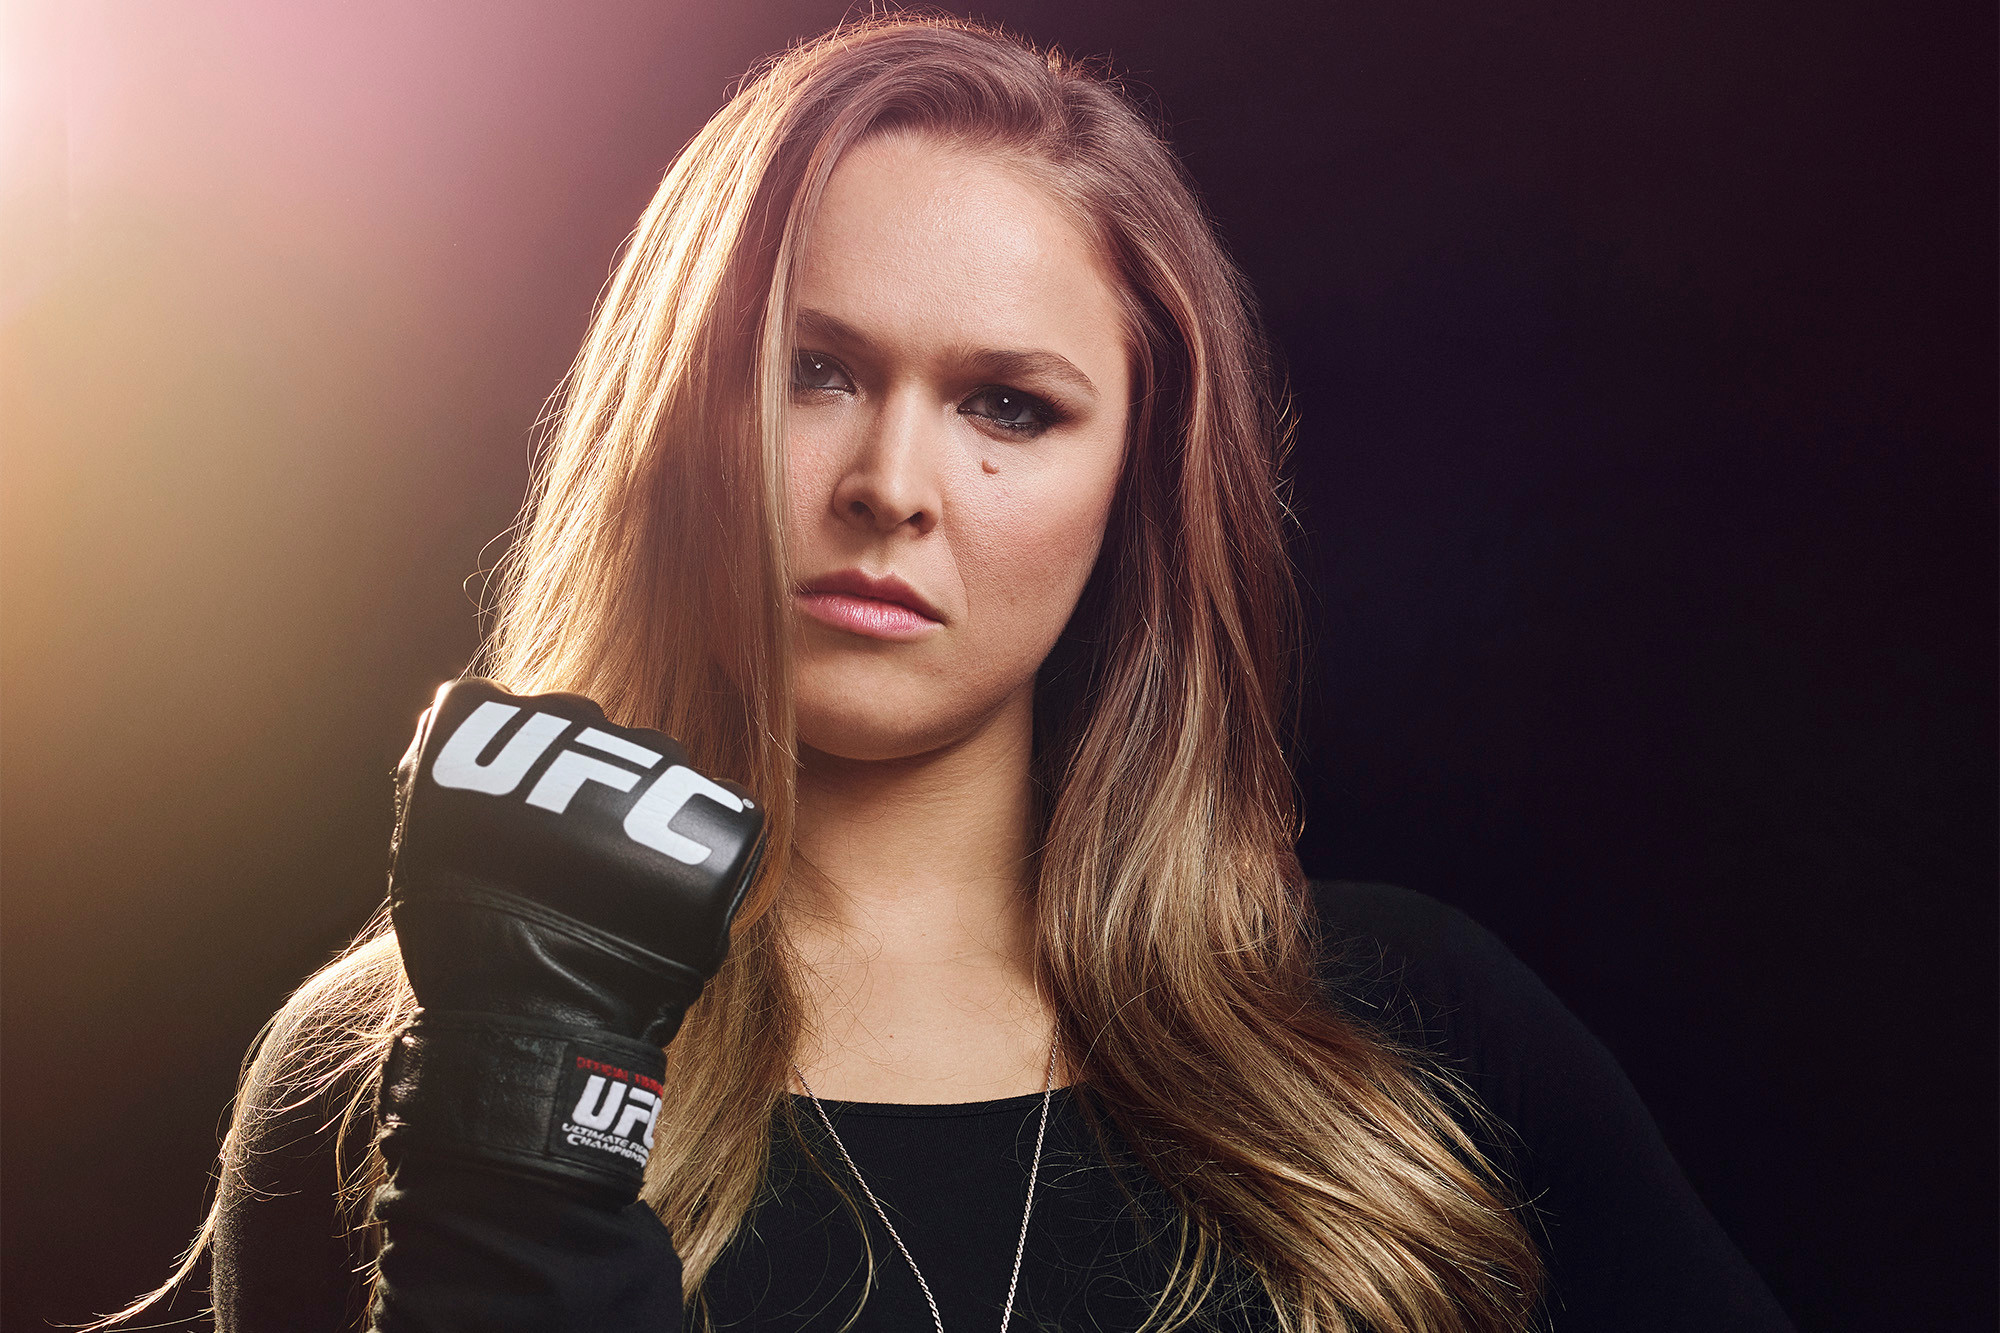 Ronda Rousey 1 Arena Pile Top 10 Hottest Girls in The World